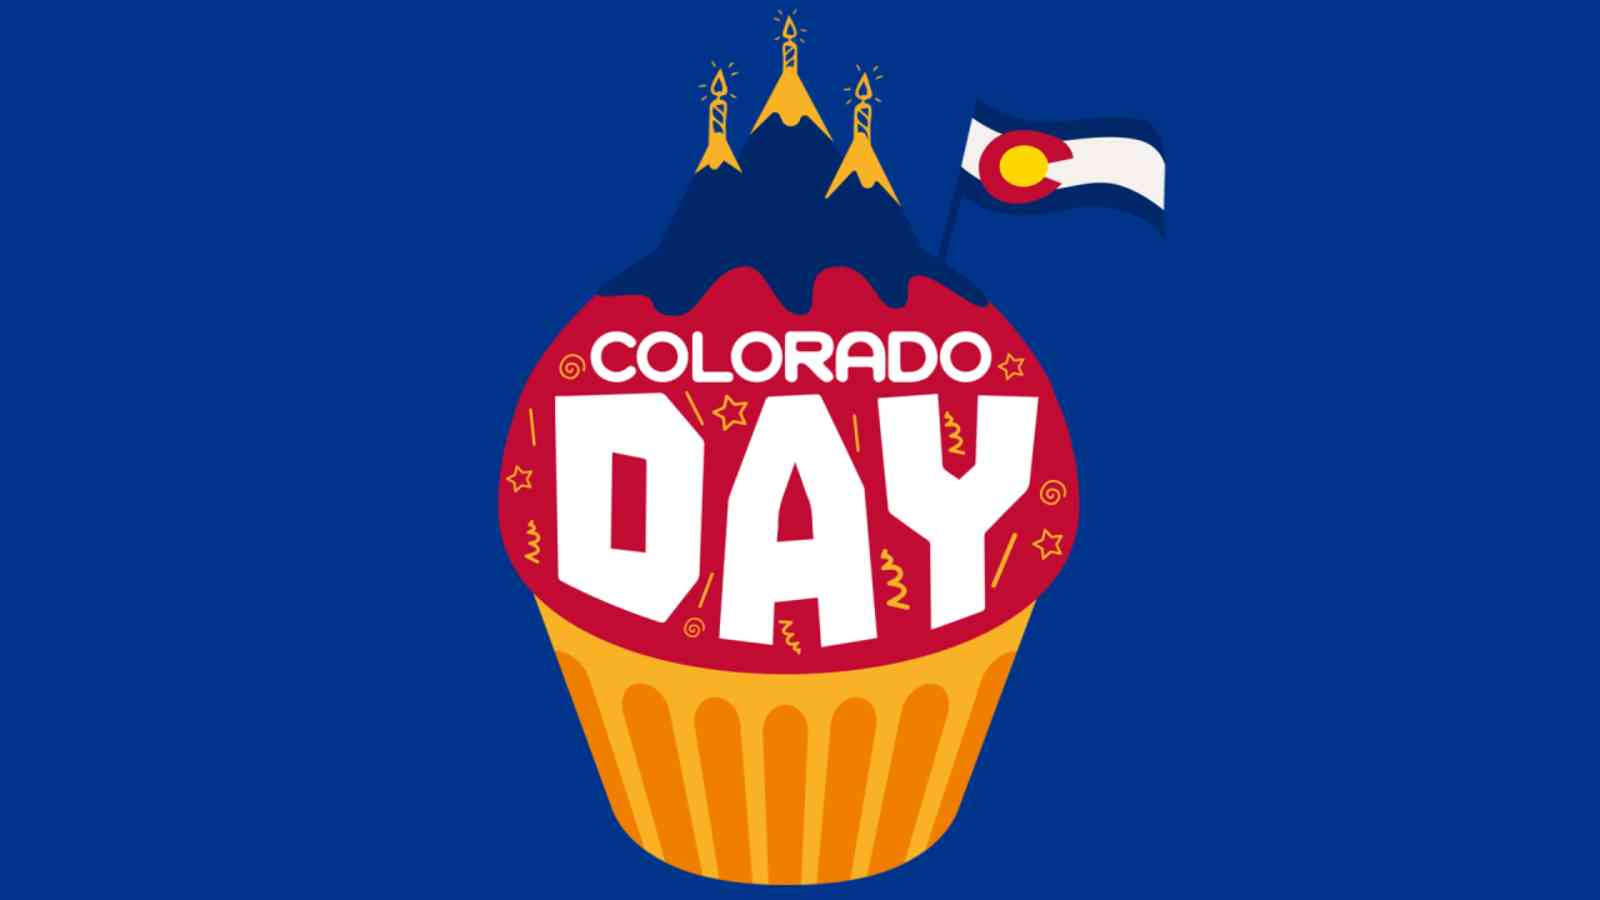 Colorado Day 2022: Date, History and Significance